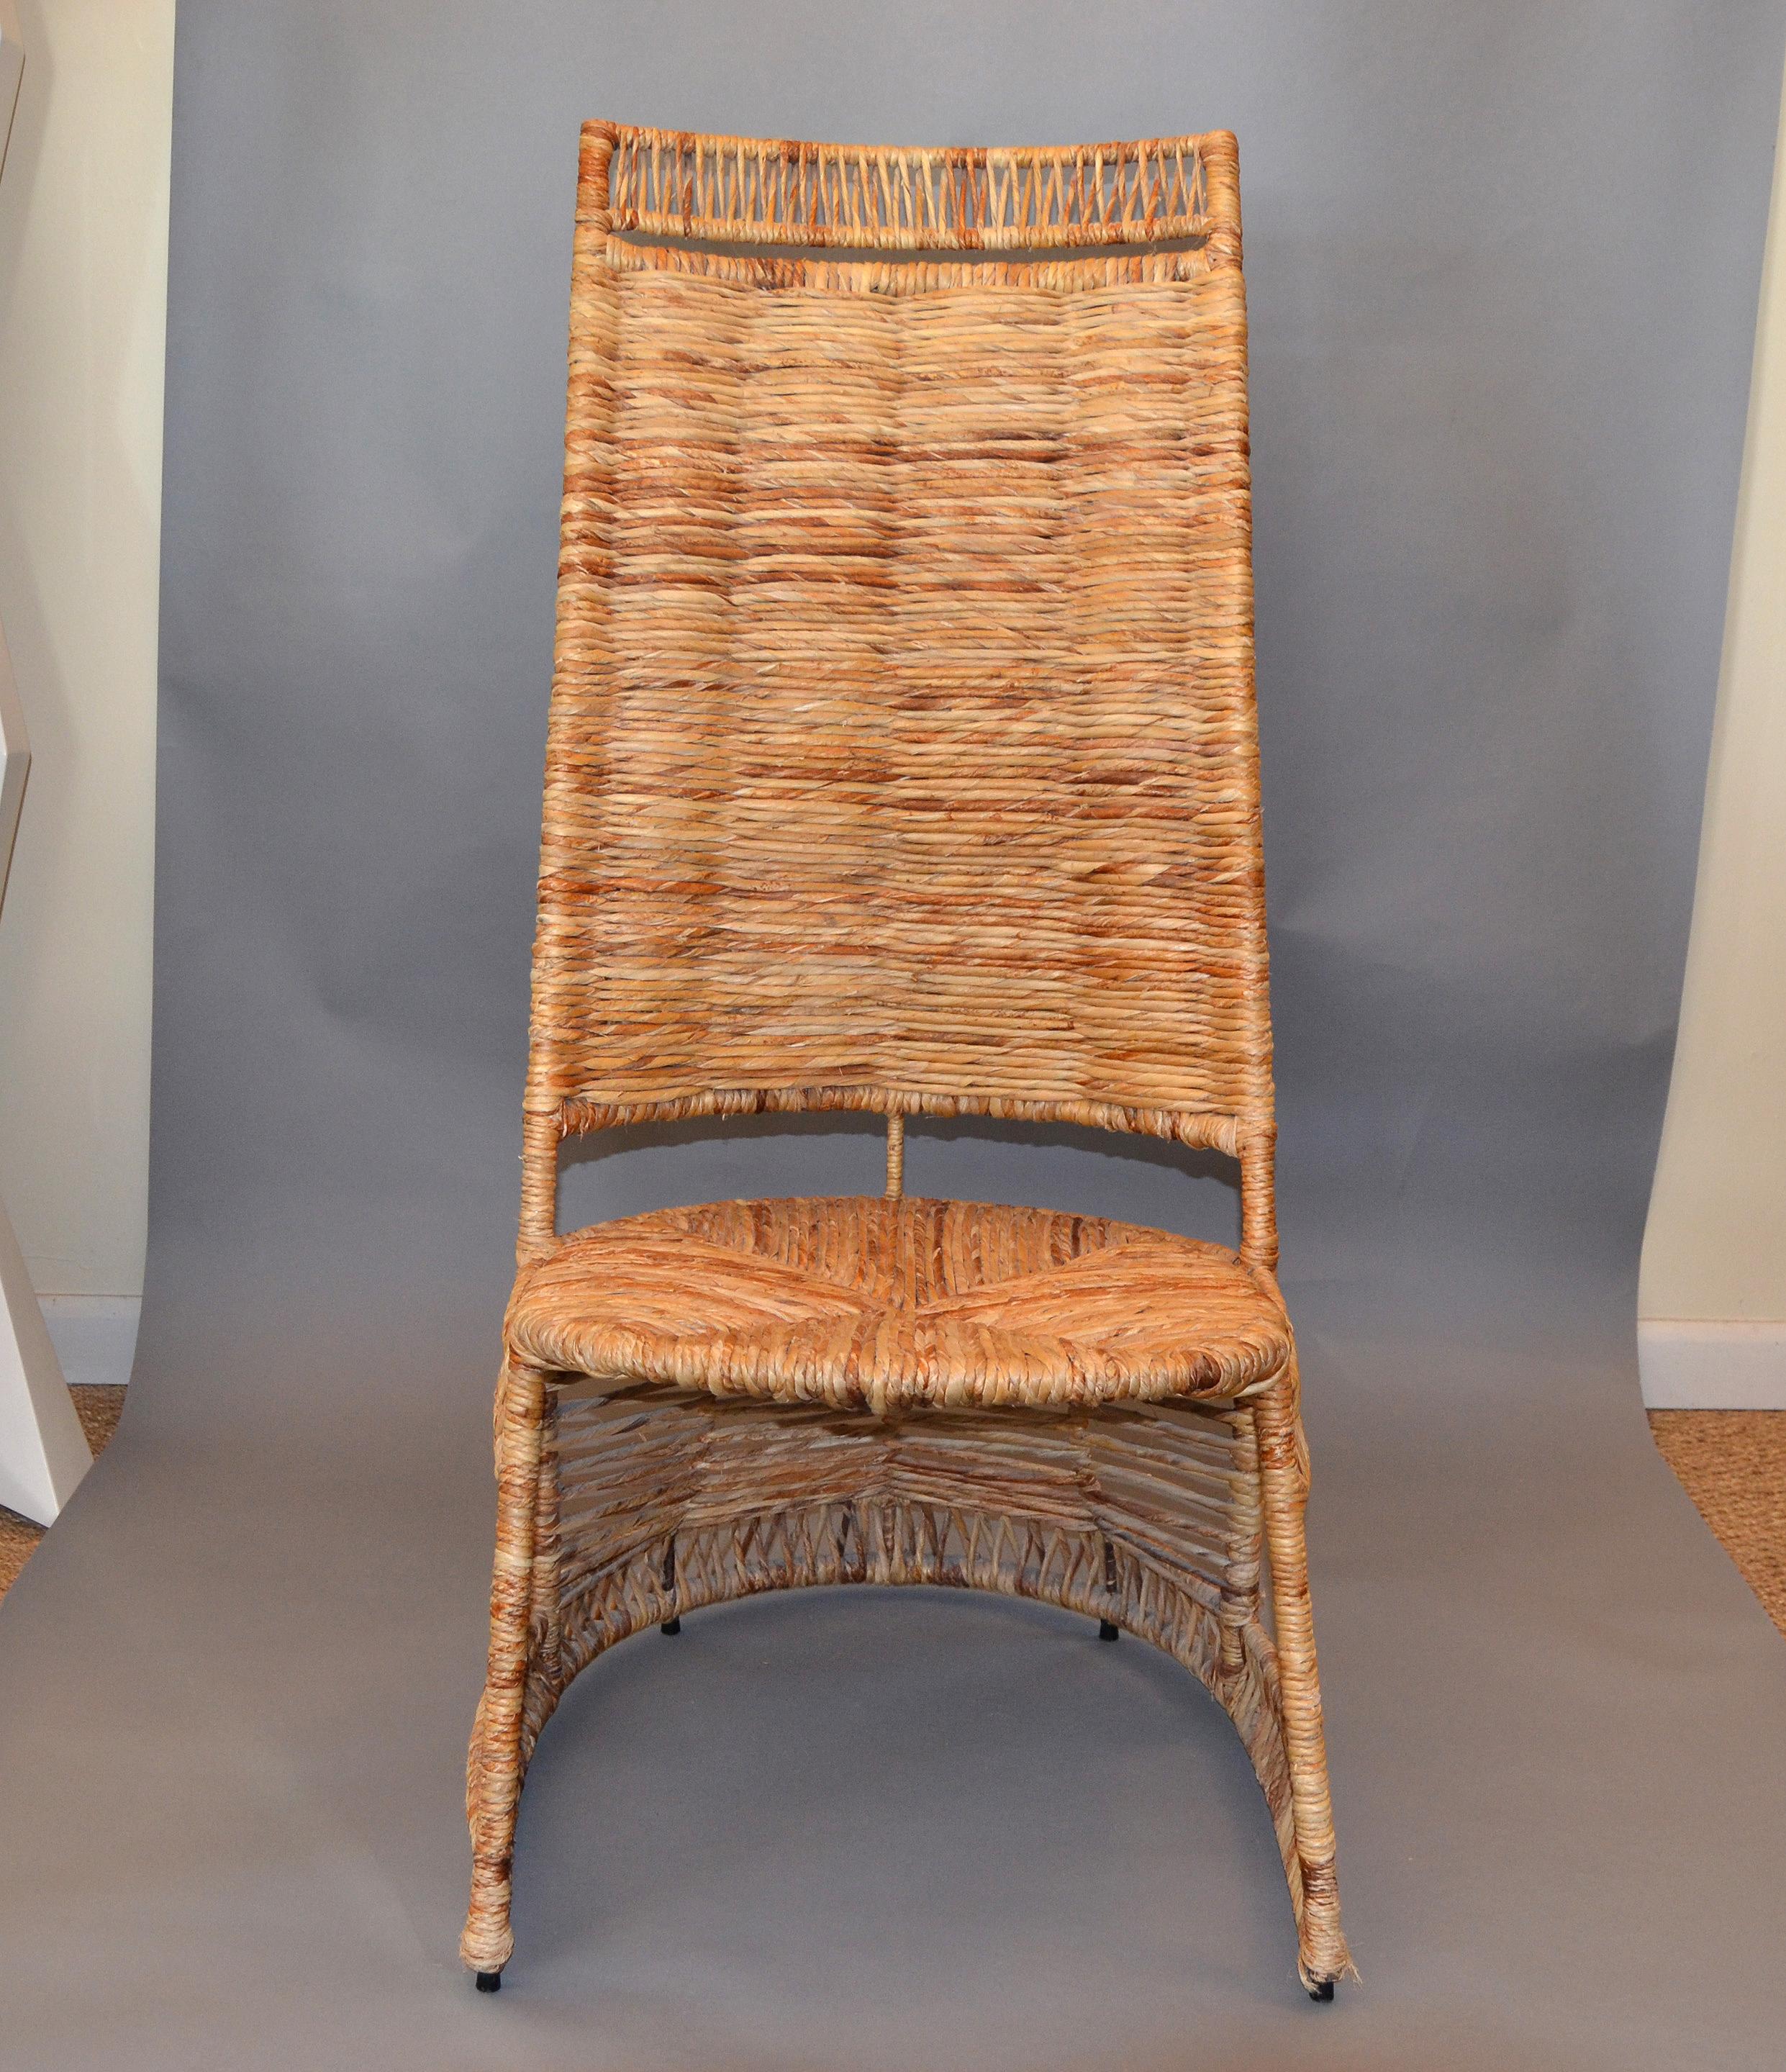 This side chair is one of a kind. 
It has a metal core and is entirely handwoven with strand cane and rattan reed. 
The woven rush seat and the sculptural base is stunning.
The chair is very comfortable and can be used as a reading chair or for